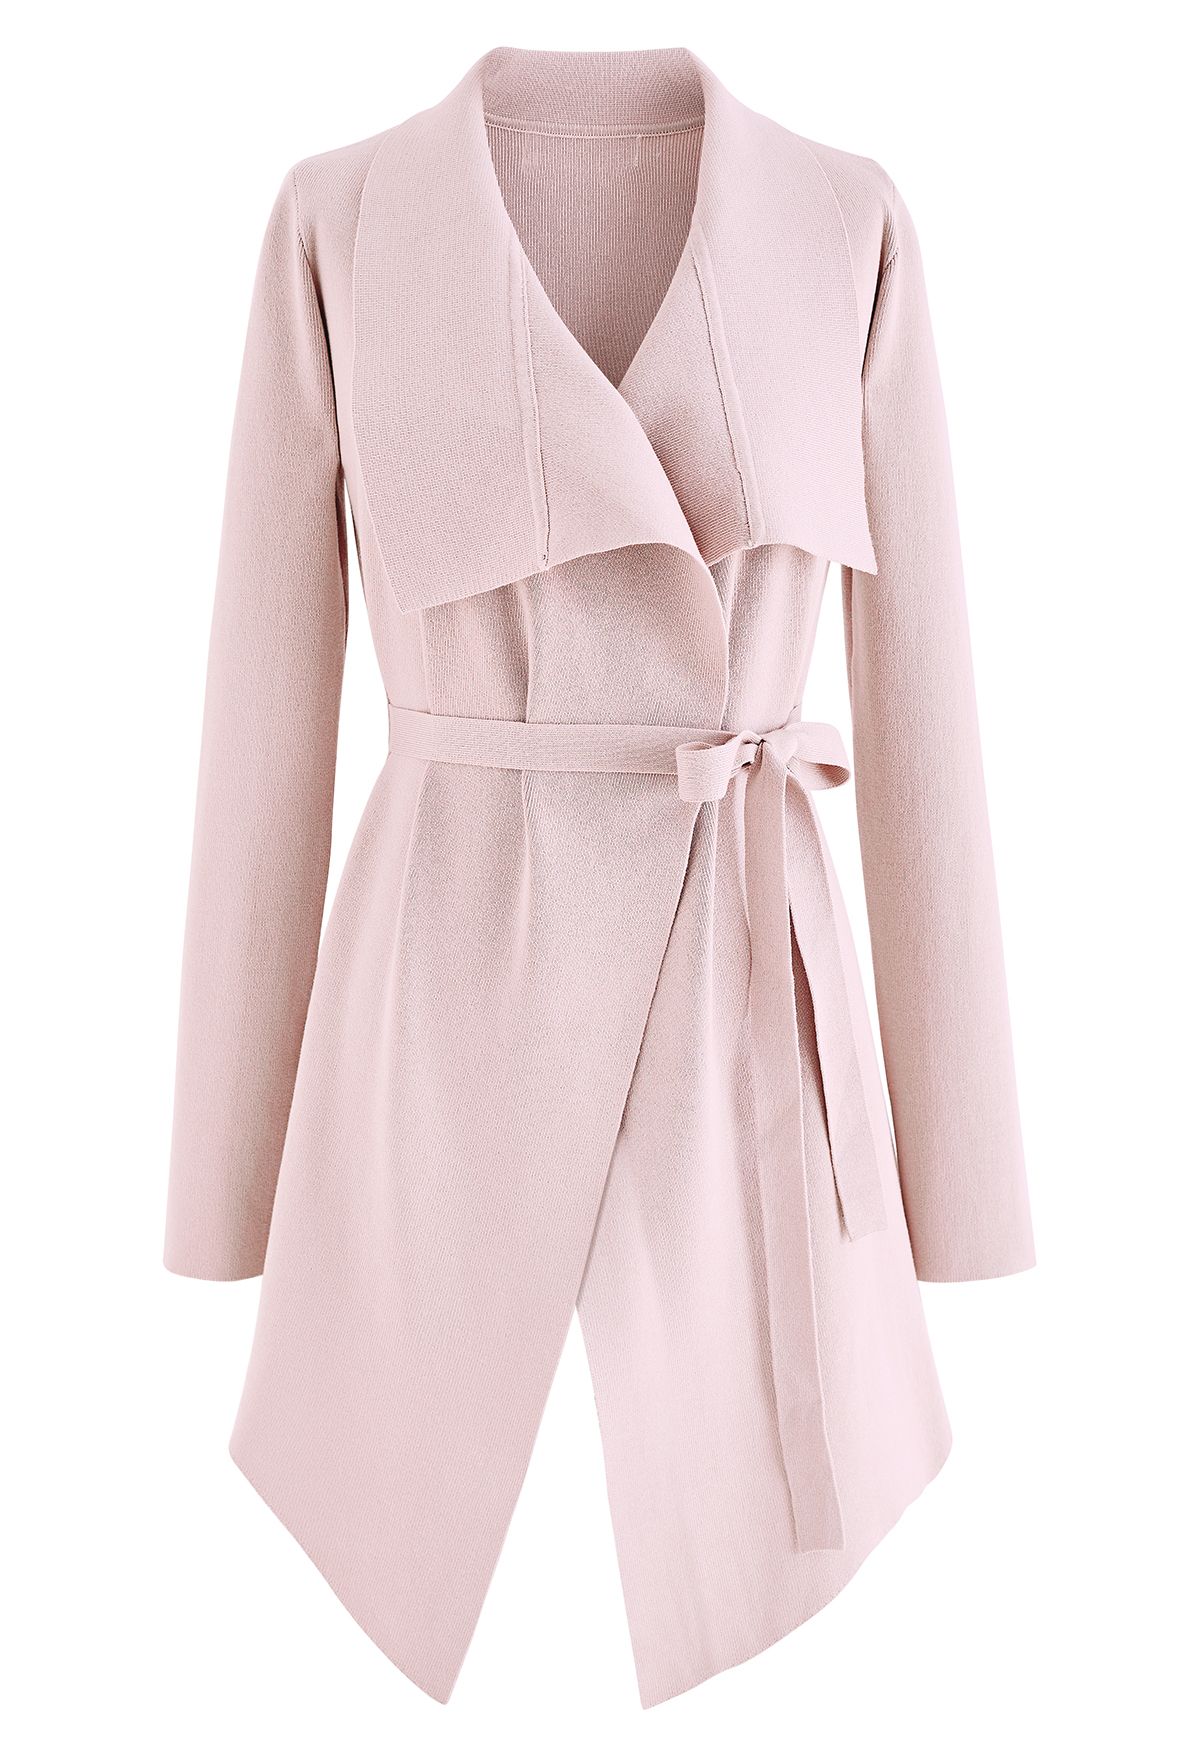 Wide Lapel Tie Waist Knit Cardigan in Pink - Retro, Indie and Unique ...